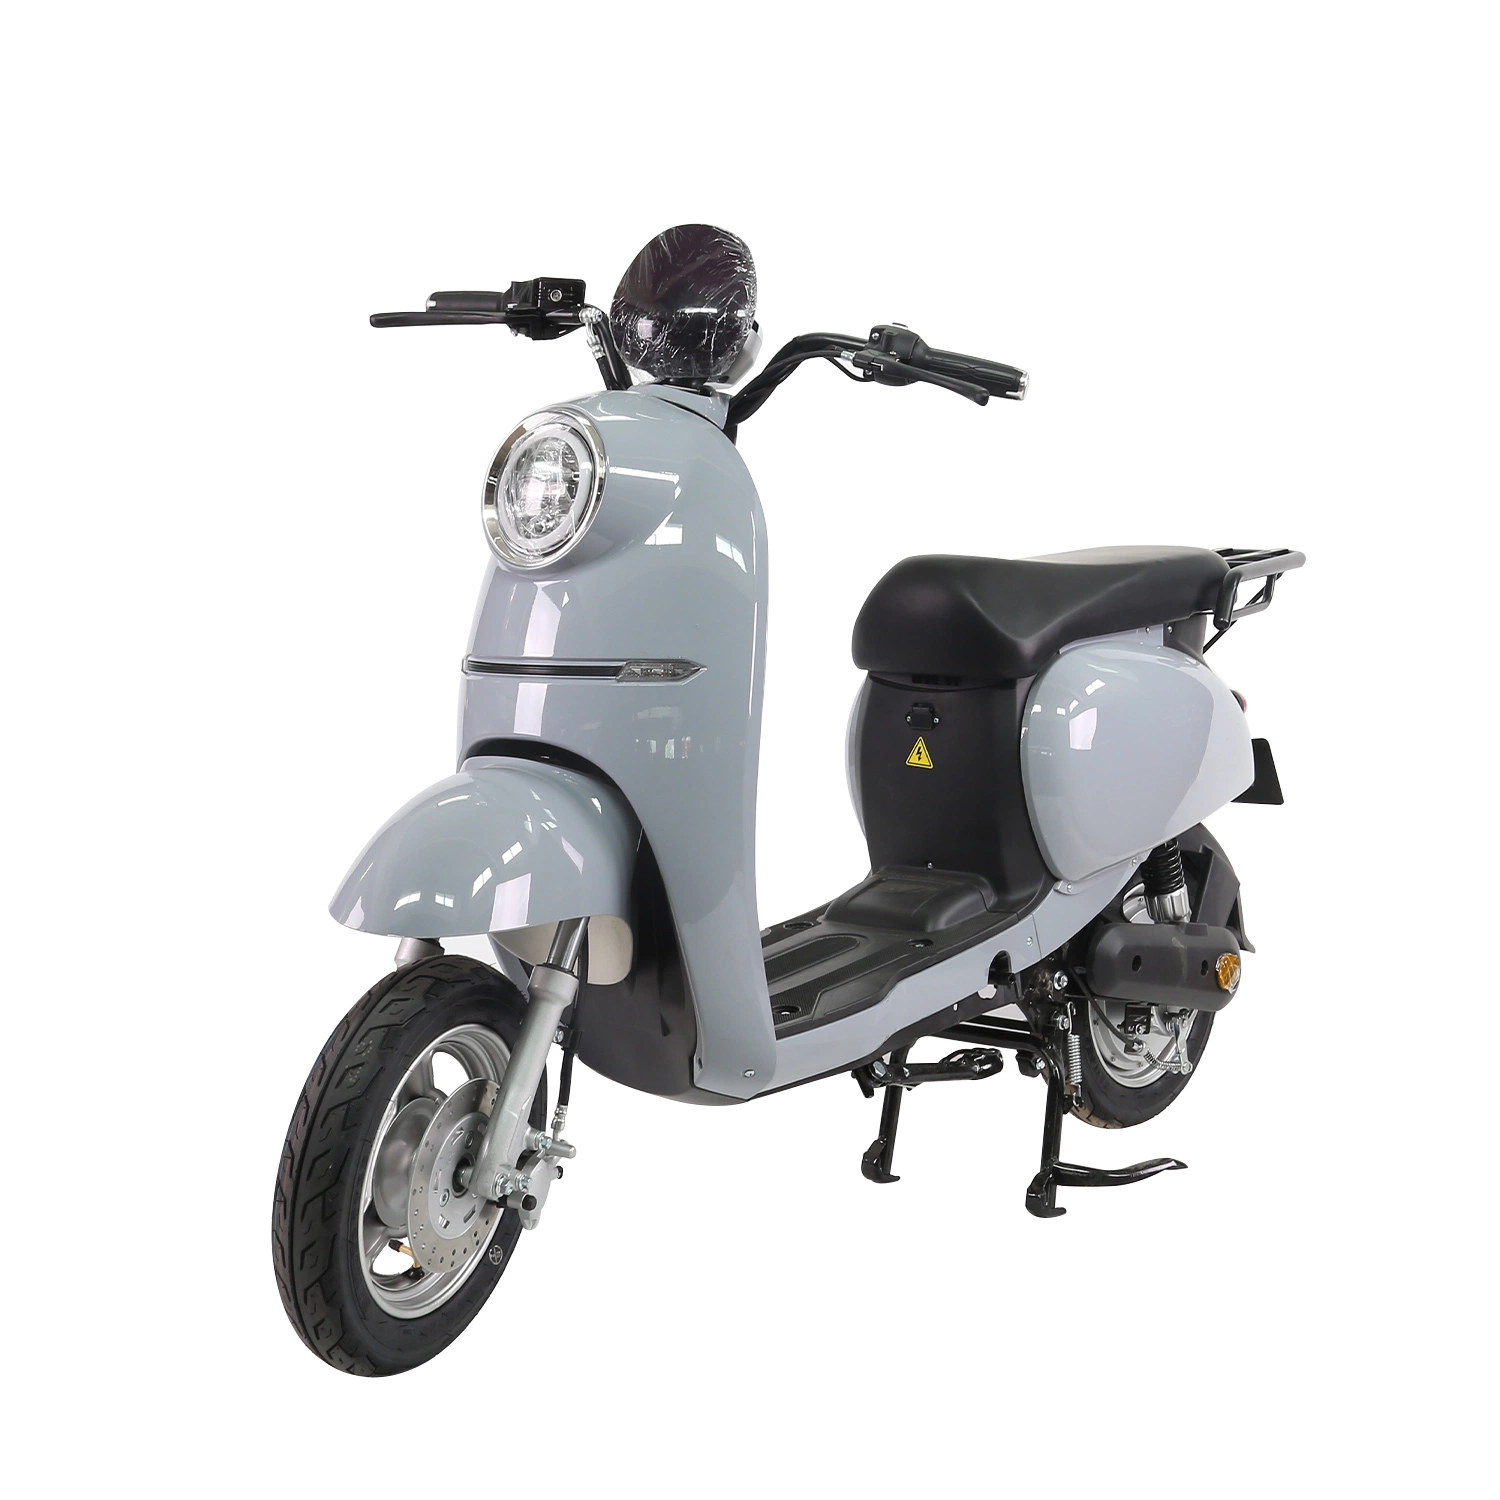 1500W Max Speed 50km/H and Max Range 90km Vespa Two Sets of 70V35ah Low-Carbon Electric Motorcycle Control System LED Light Vehicle Small White